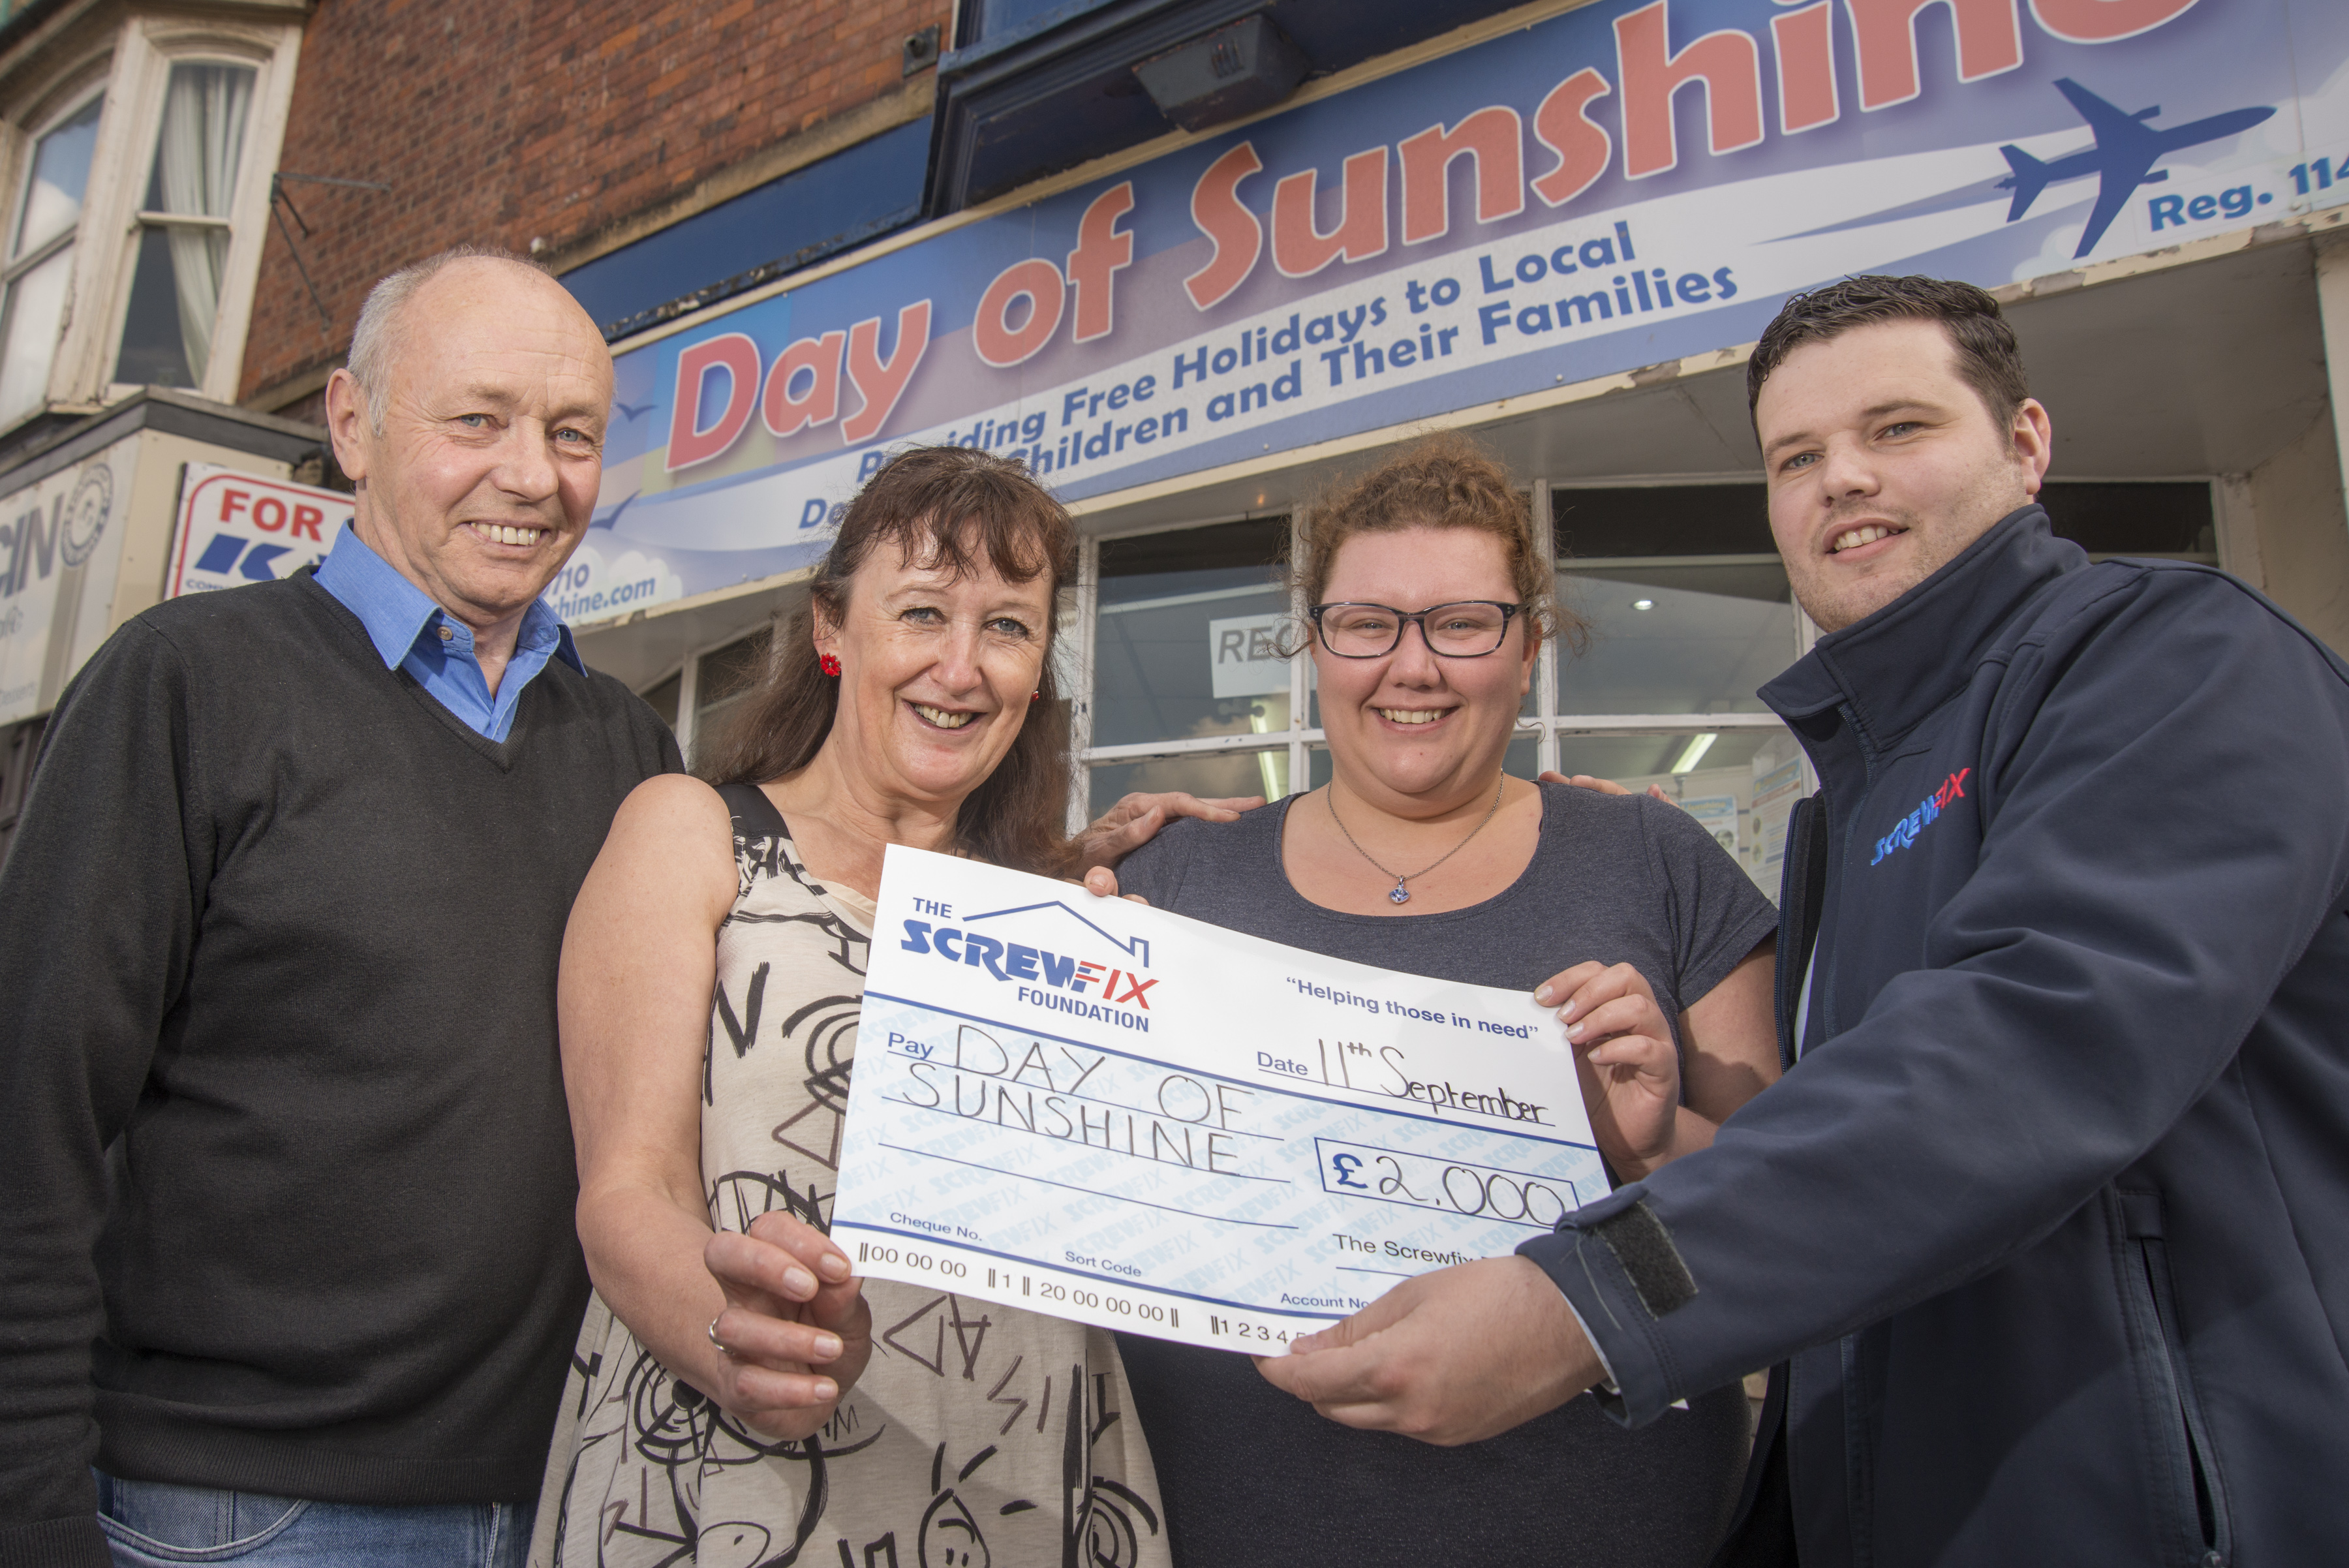 Lancashire based charity gets a helping hand from the Screwfix Foundation